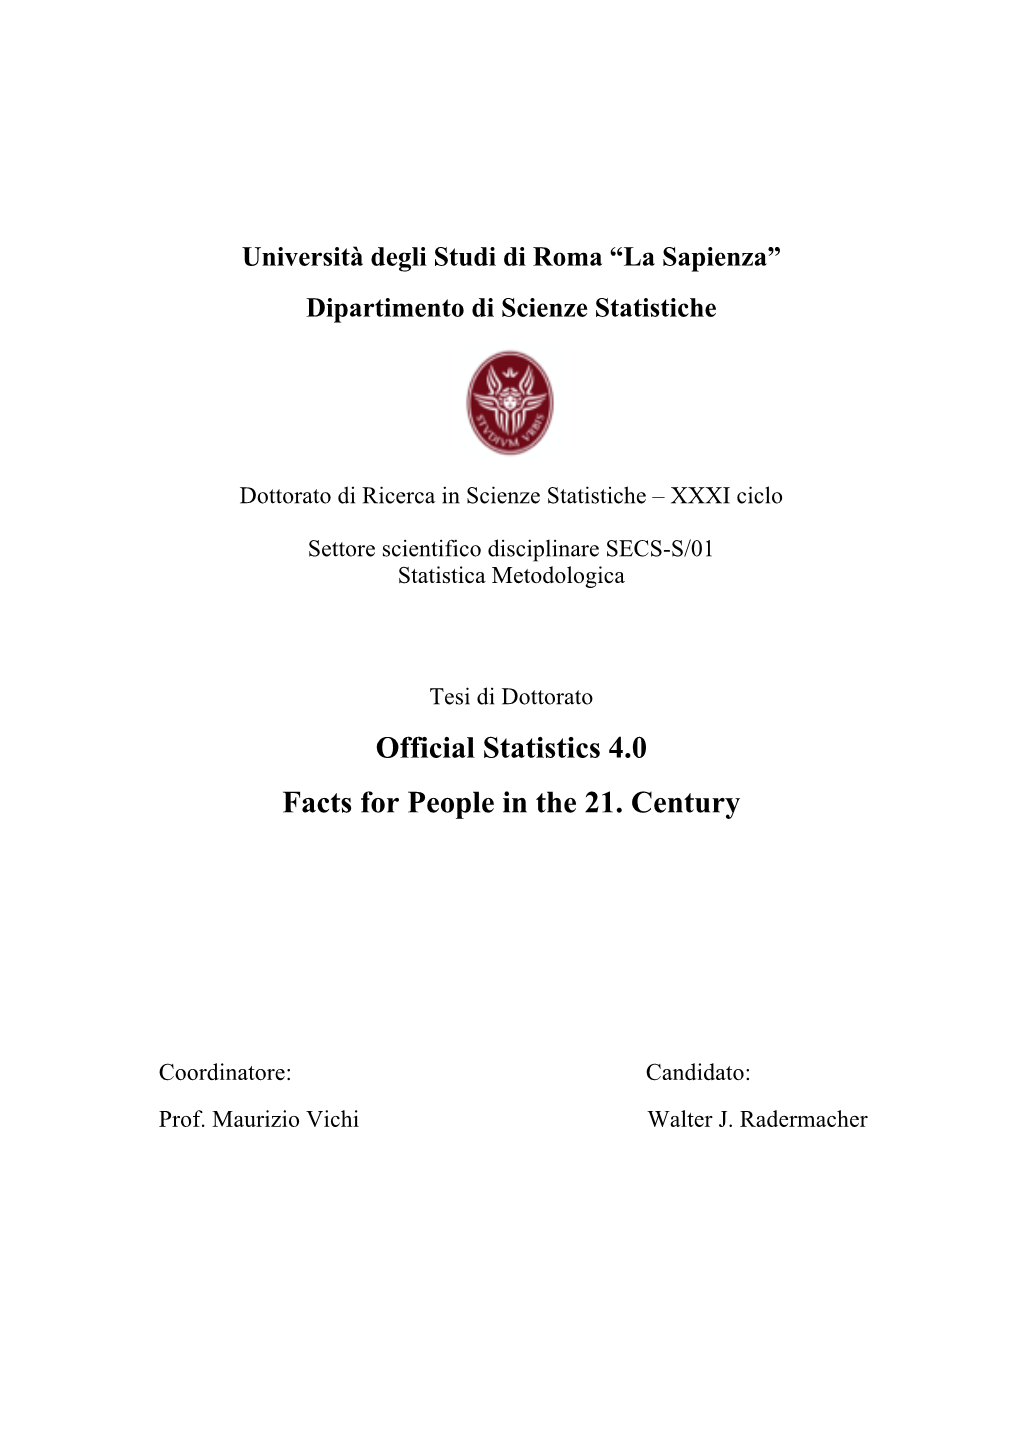 Official Statistics 4.0 Facts for People in the 21. Century